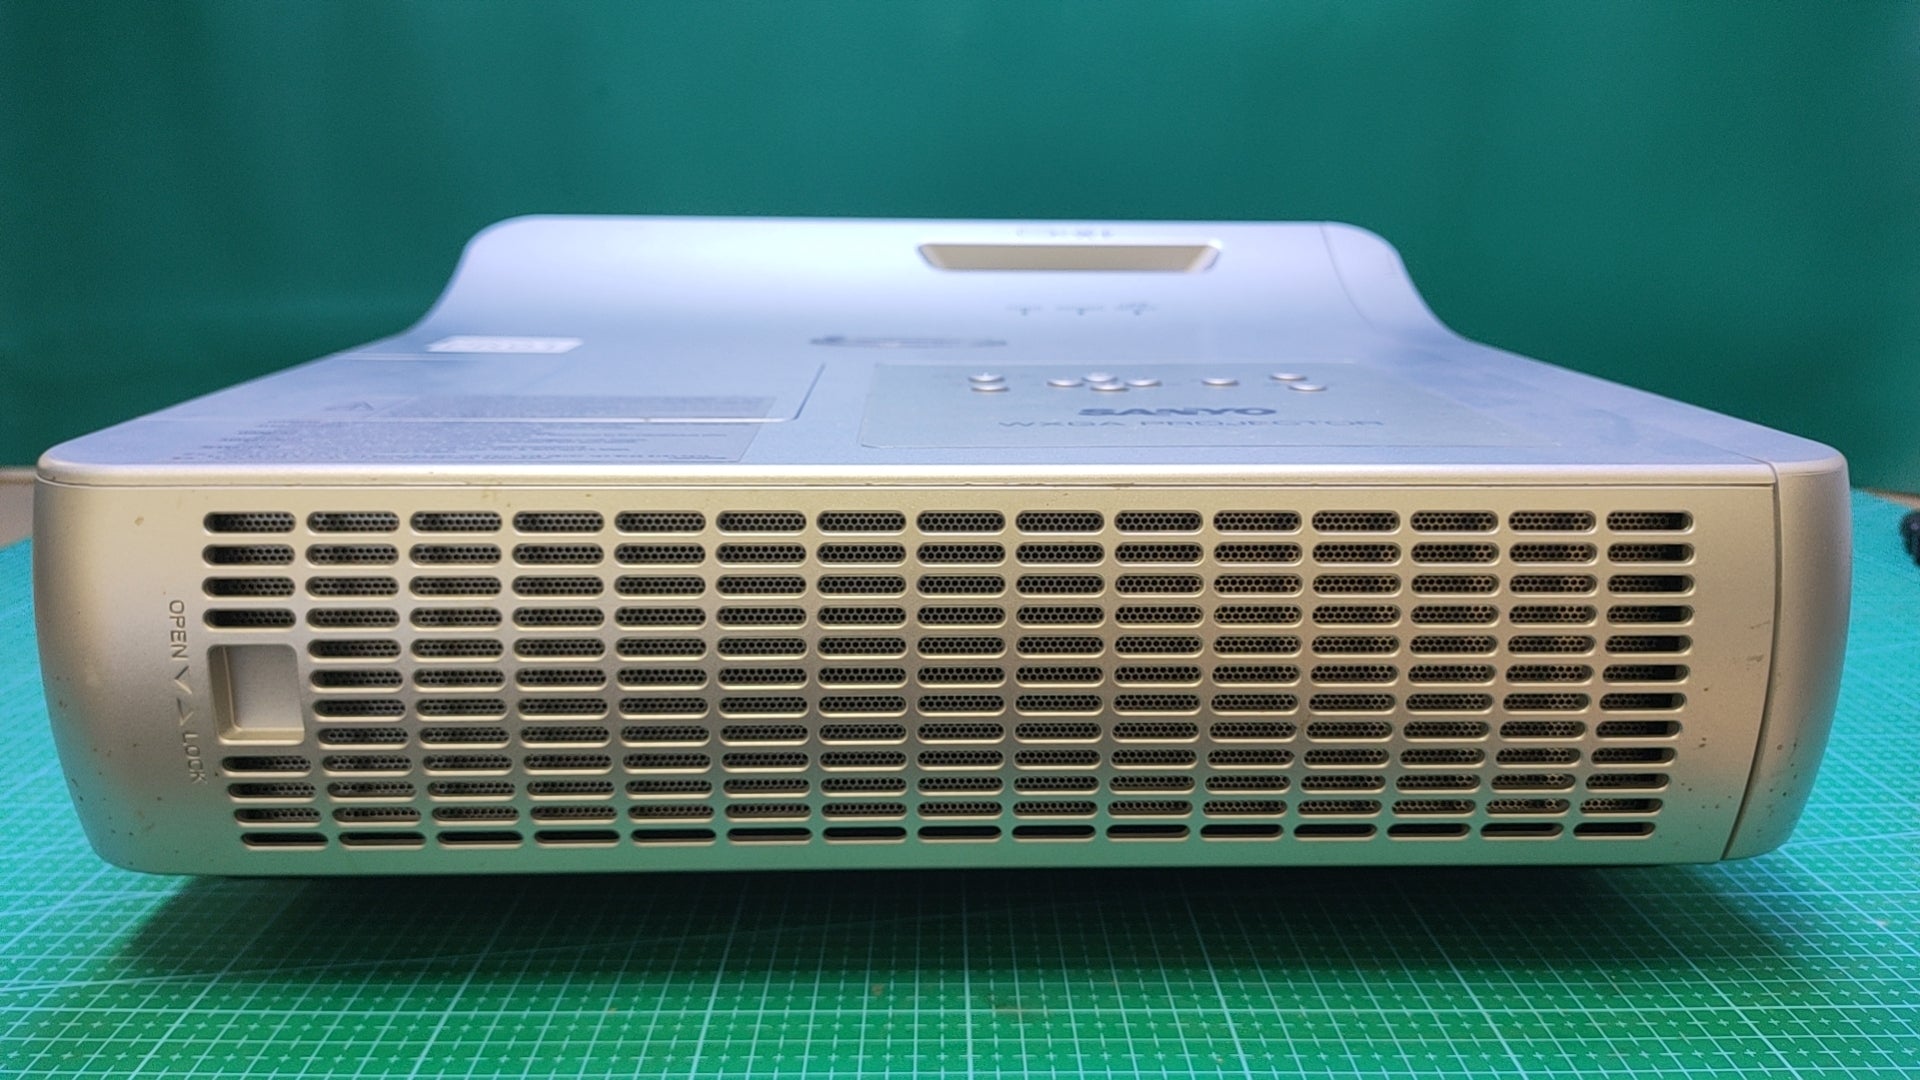 Projector Sanyo PLC-WL2500 For Home Use Projectors